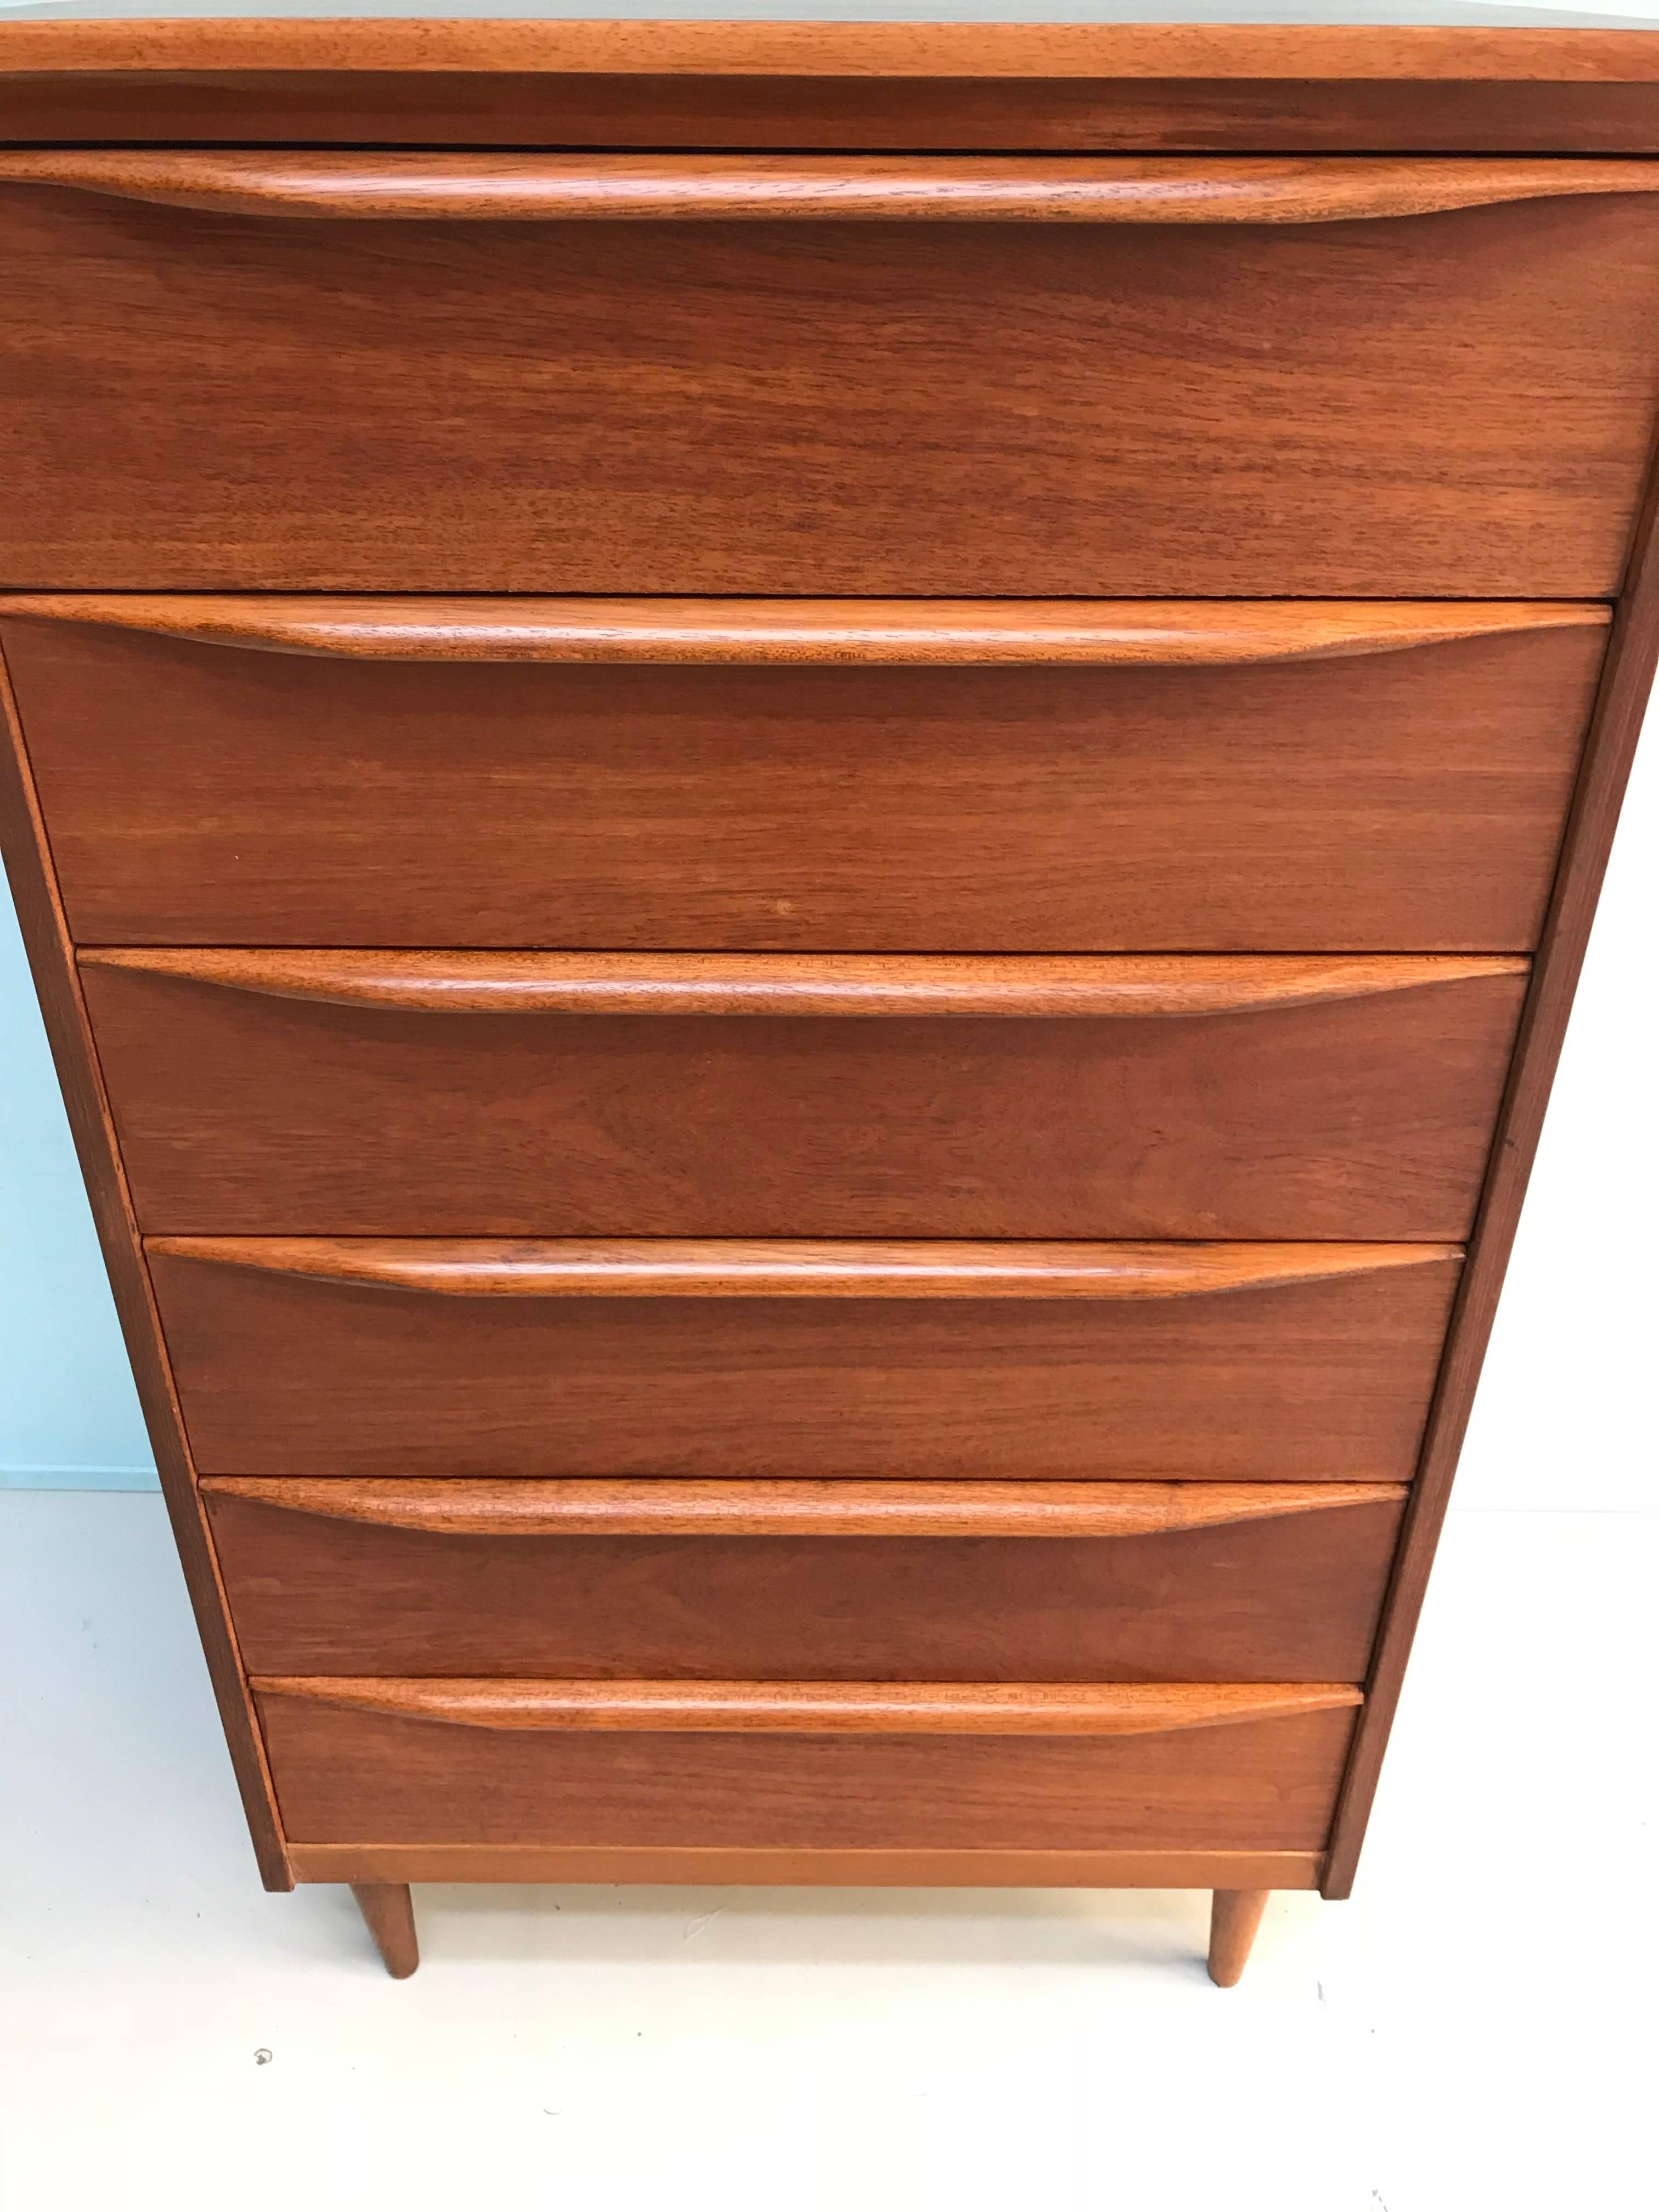 Stunning teak six-drawer enfilade by Austinsuite made in England design by Franck Guille in the 1960s.

Condition: very good
Measurements:
66 cm W/112 cm H/46 cm D

Itemnumber: 230.